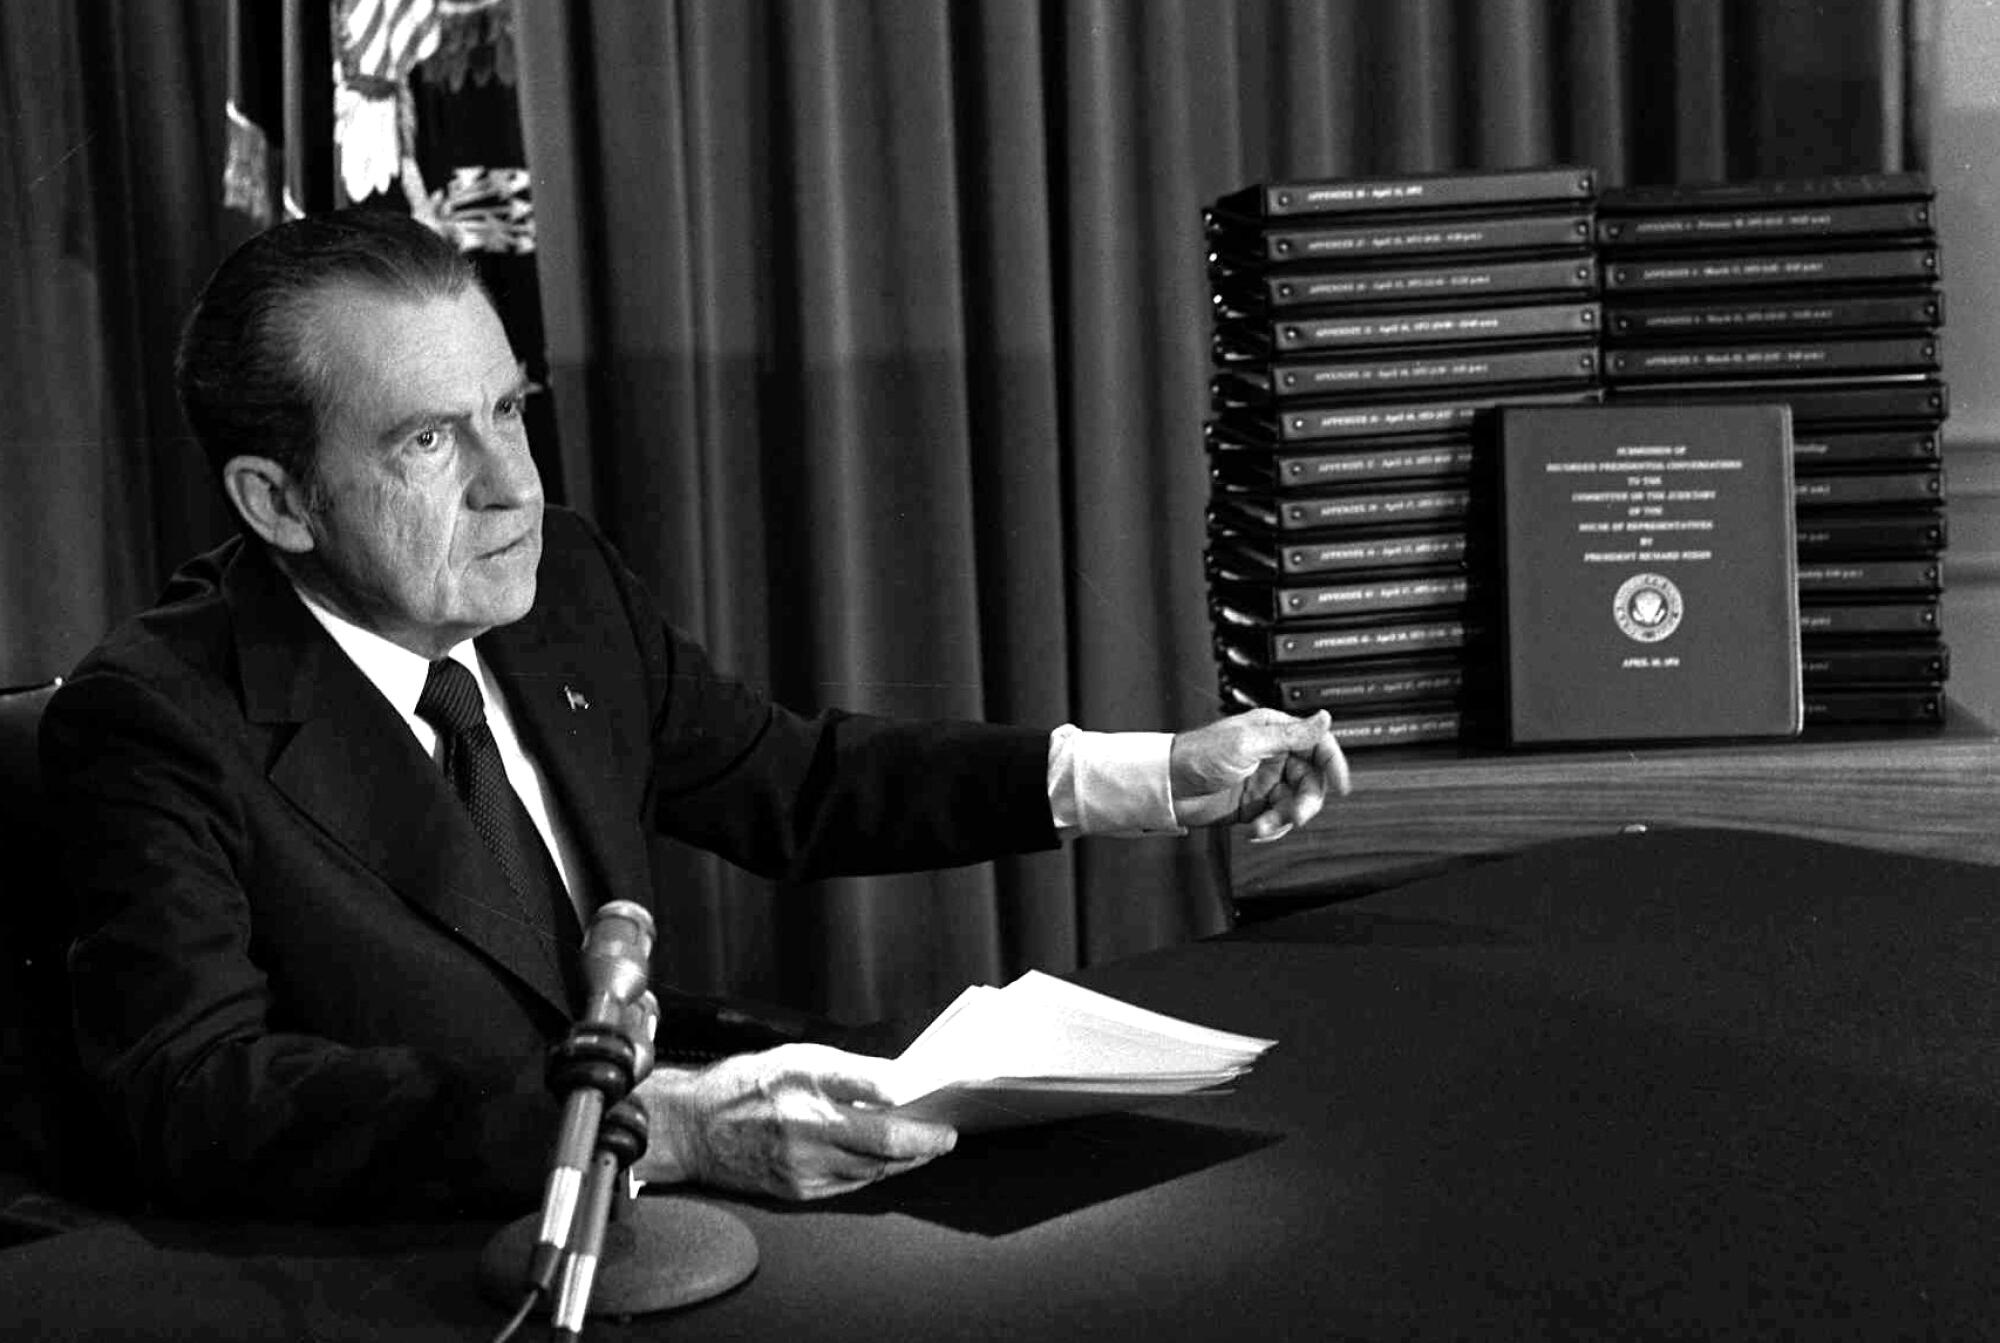 President Nixon sits at a microphone and points to bound transcripts.